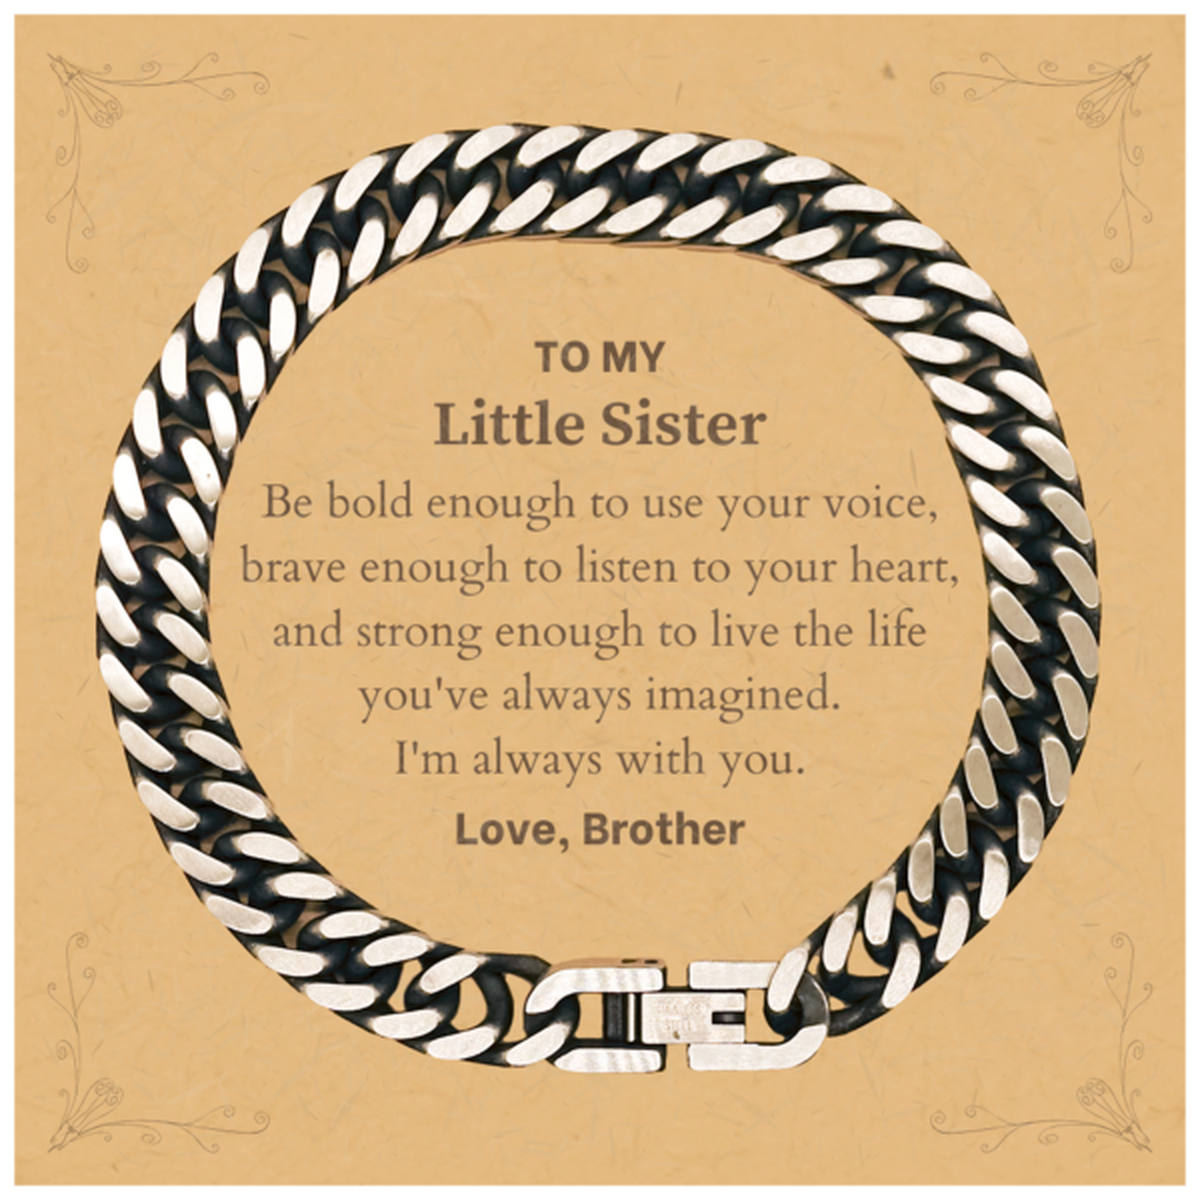 Keepsake Little Sister Cuban Link Chain Bracelet Gift Idea Graduation Christmas Birthday Little Sister from Brother, Little Sister Be bold enough to use your voice, brave enough to listen to your heart. Love, Brother